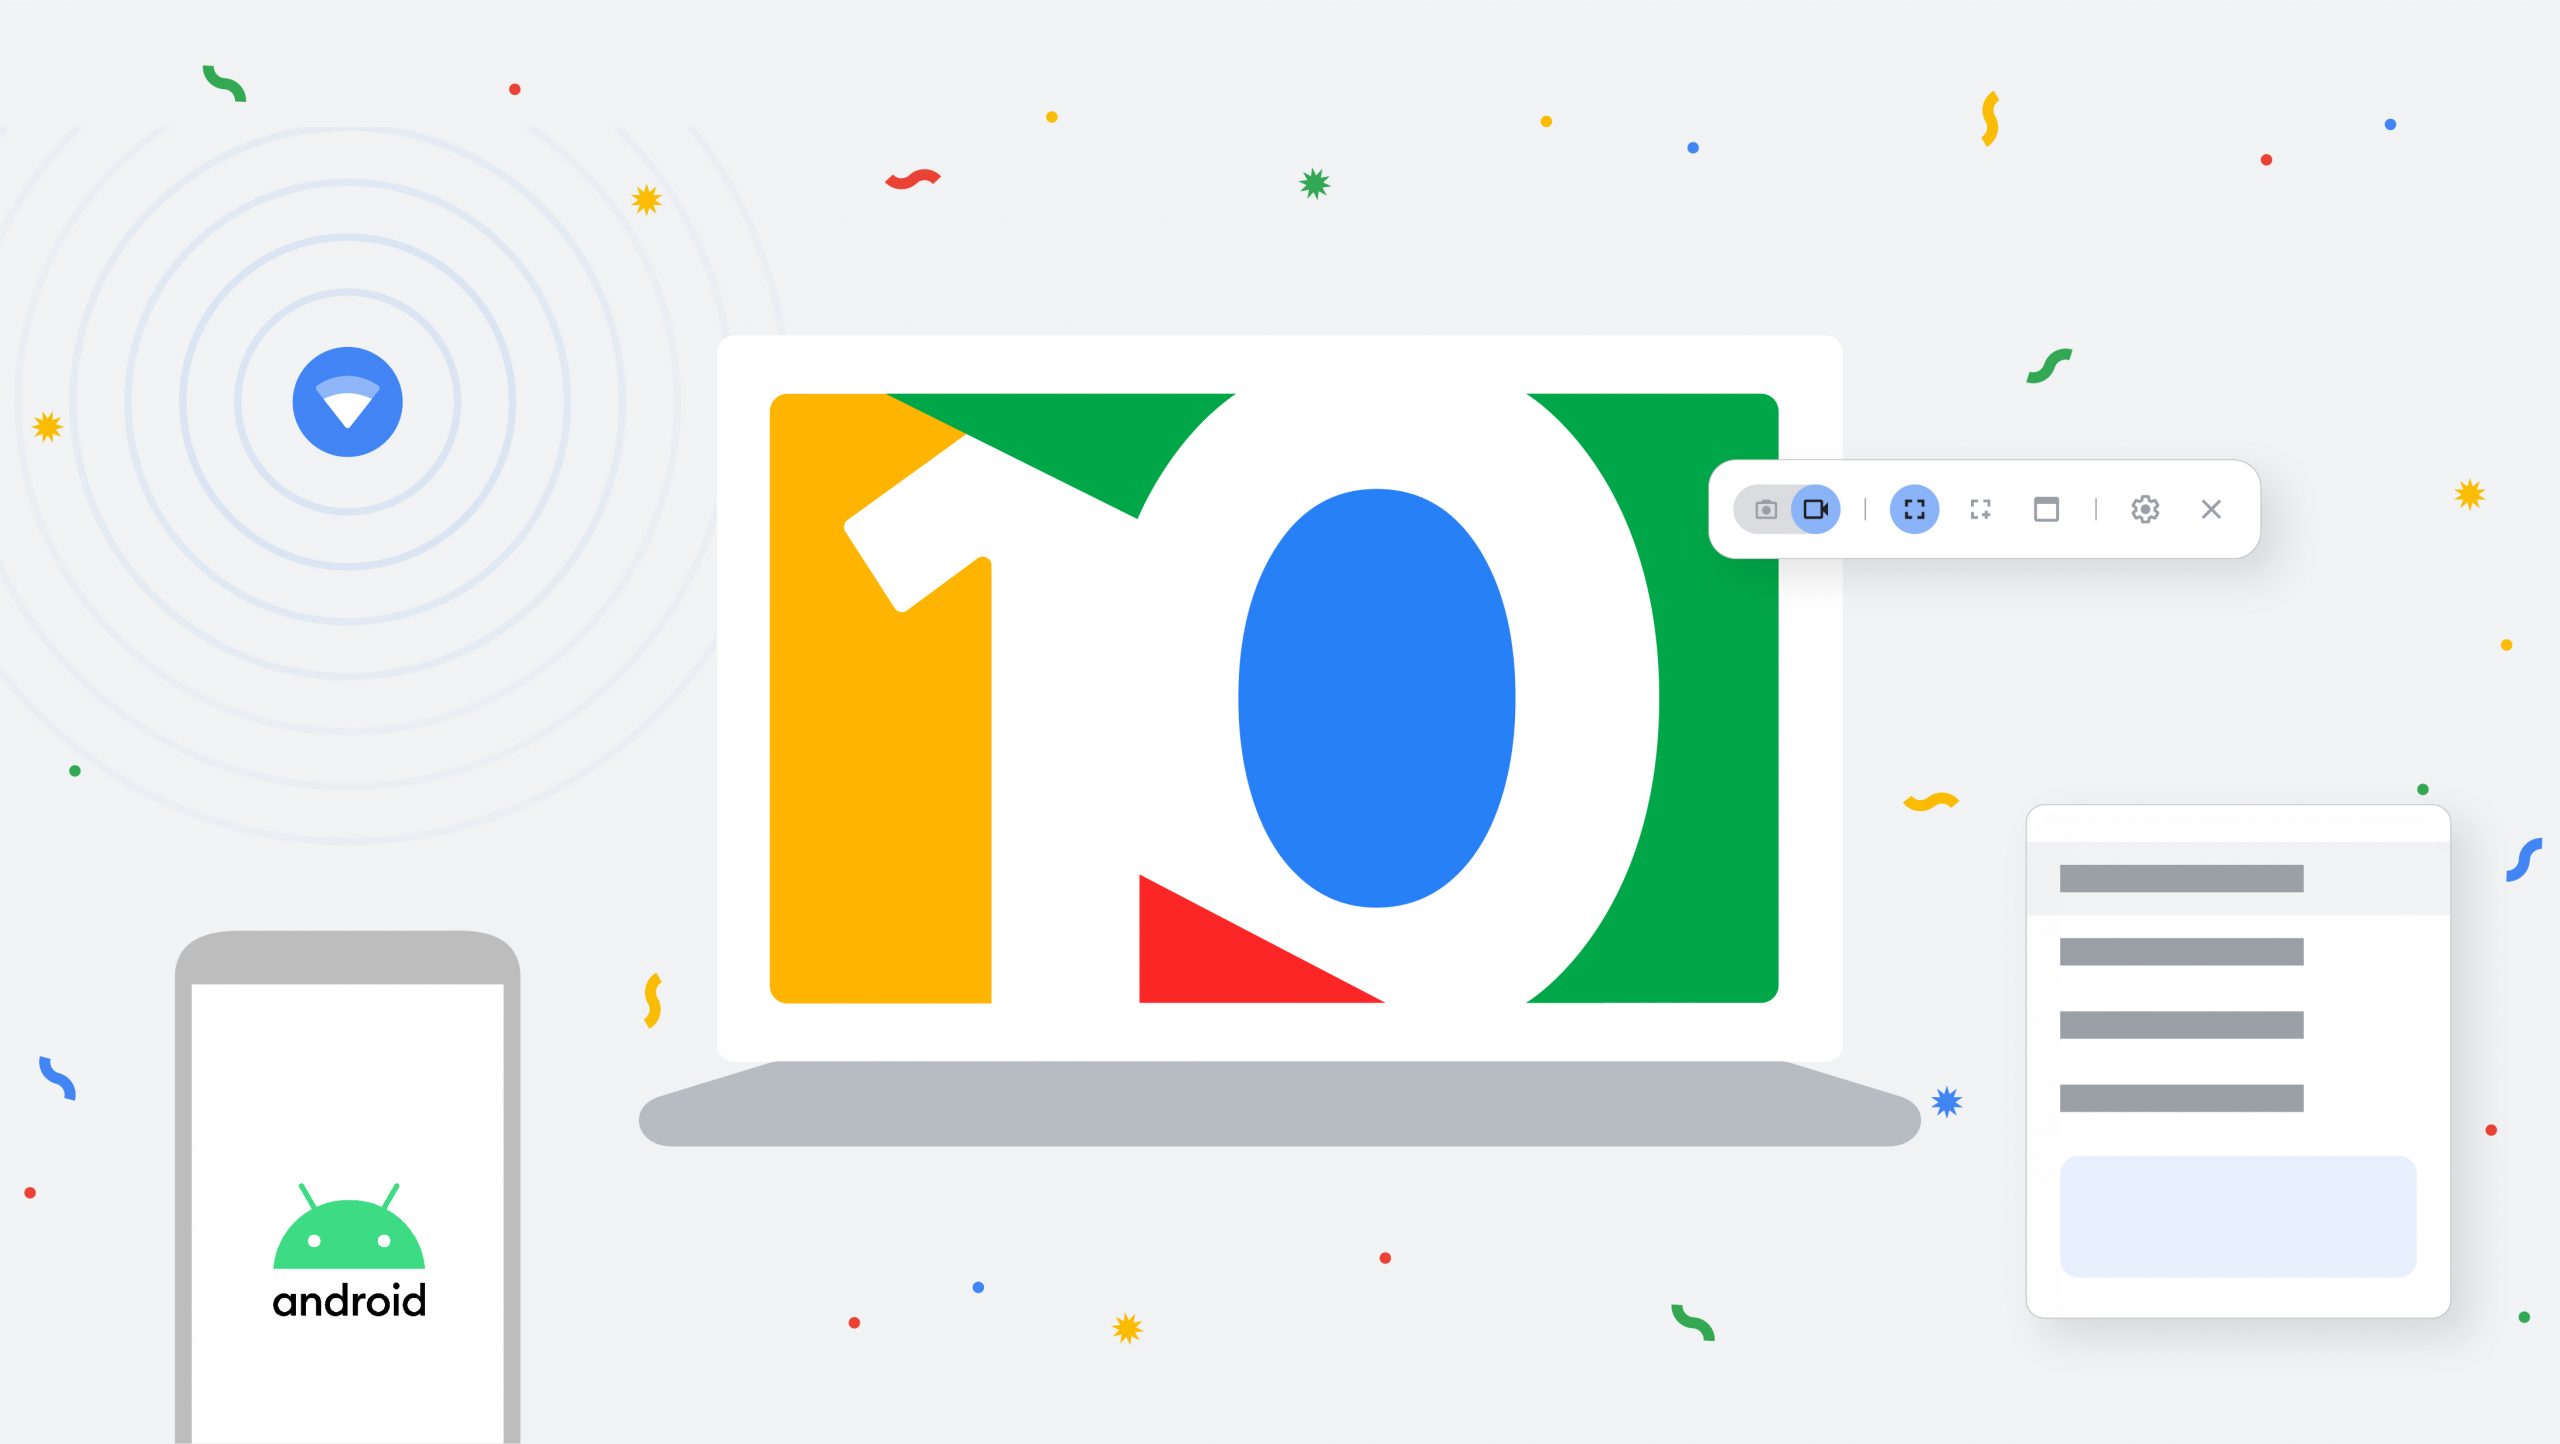 Google Launches ChromeOS Update with Important Features